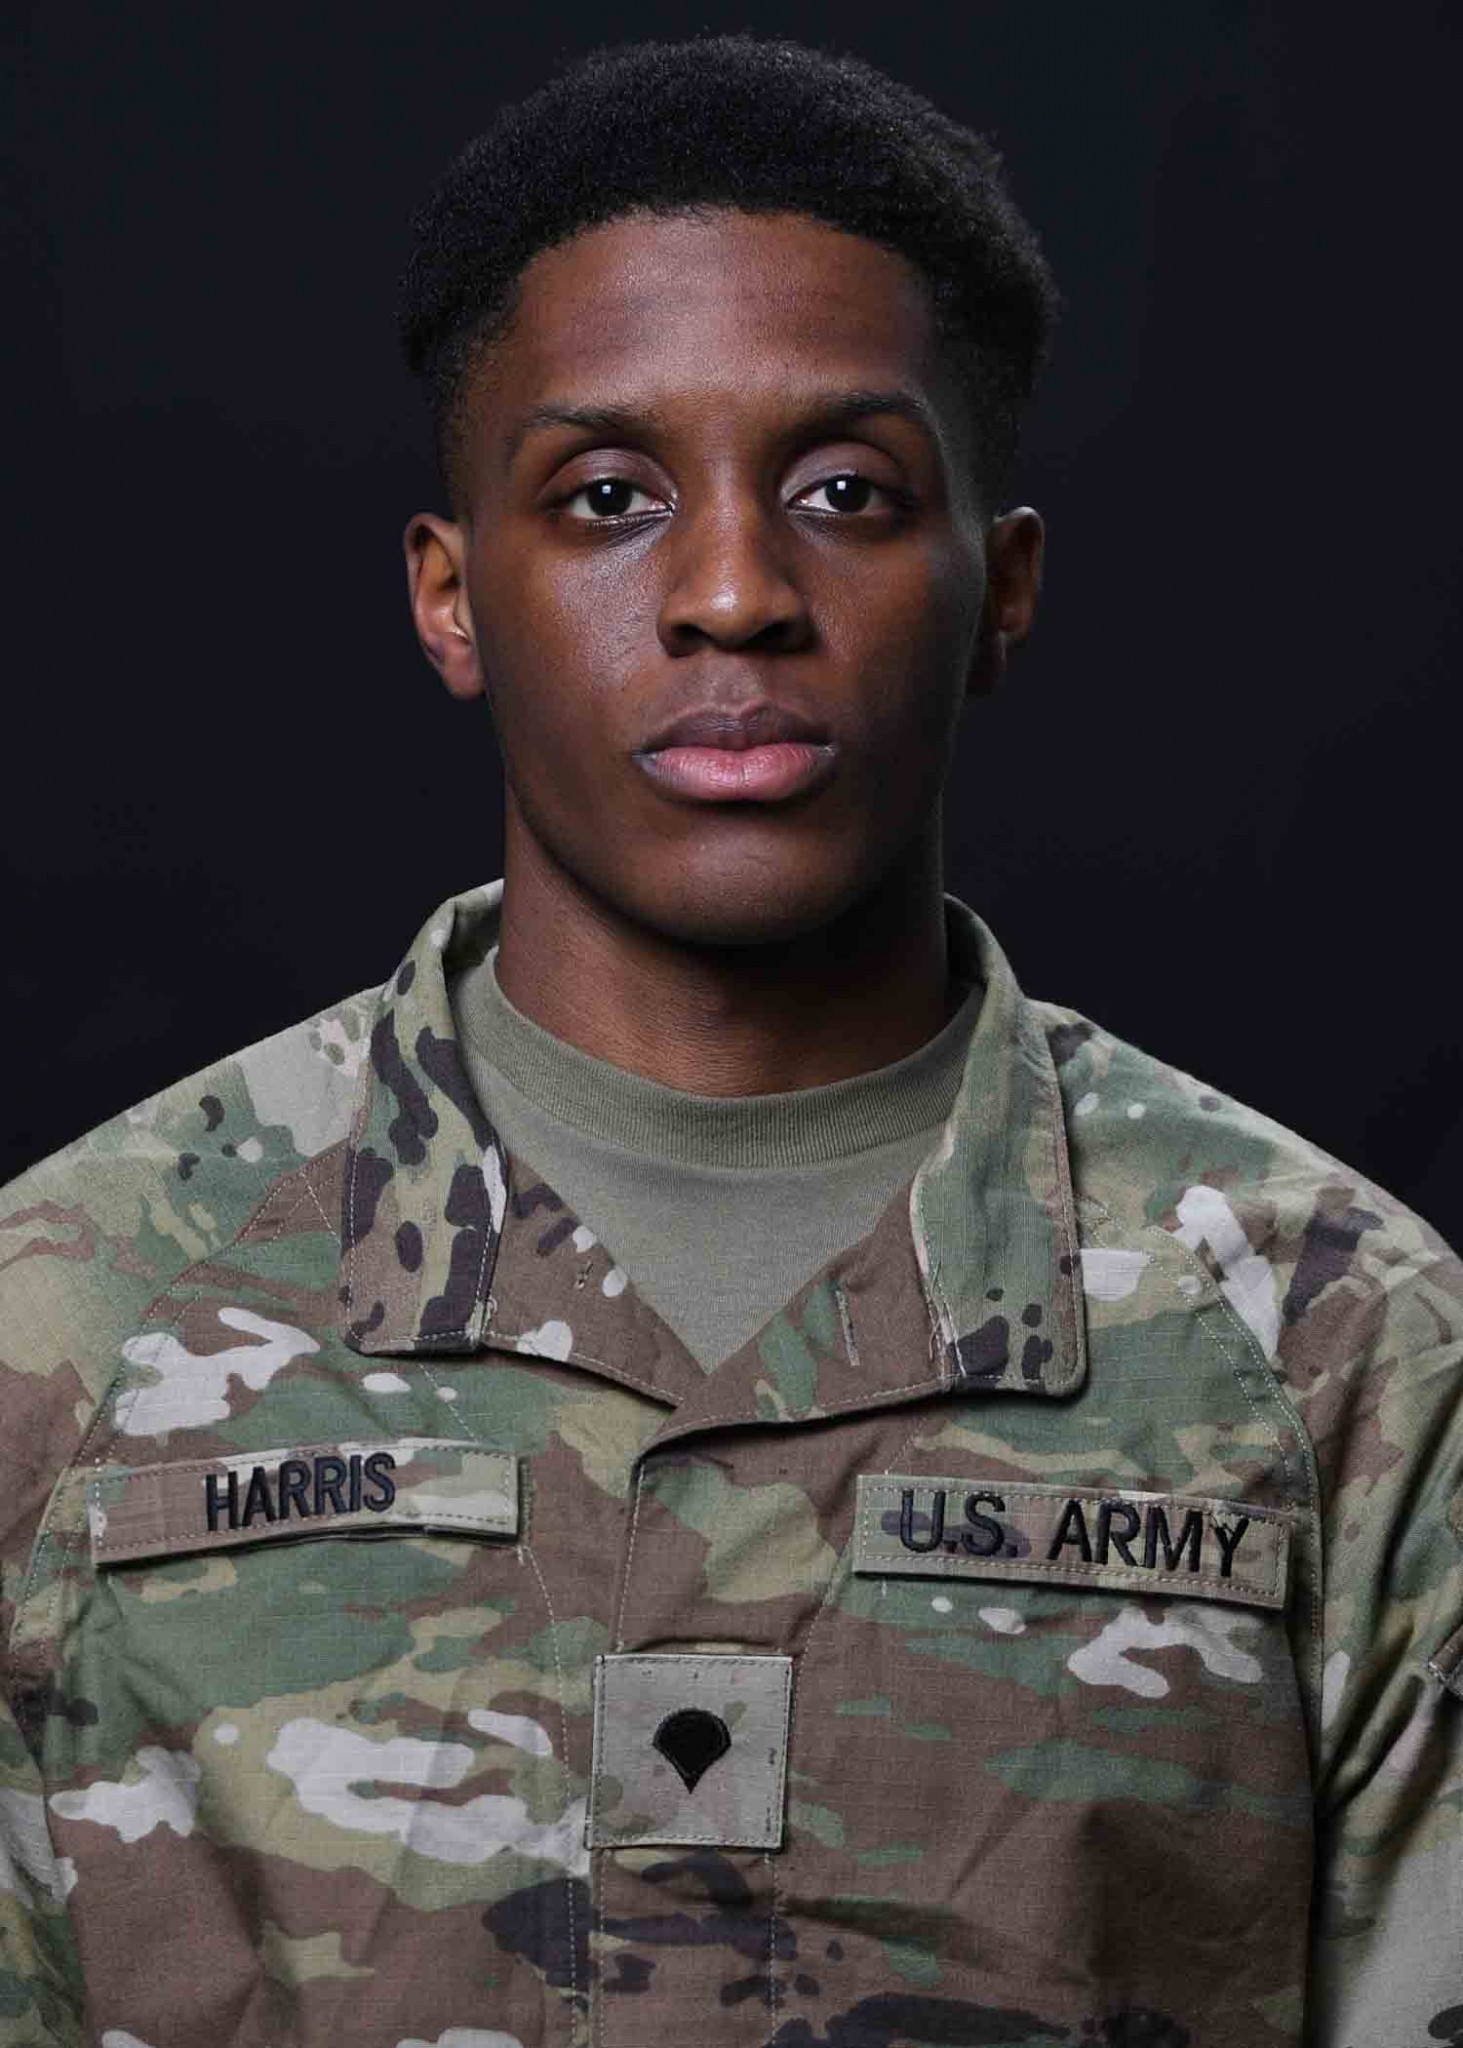 Khalfani Harris, a combat engineer for the US Army, is aiming to compete in the taekwondo at next year's Olympics in Paris after qualifying for this year's World Championships ©US Army